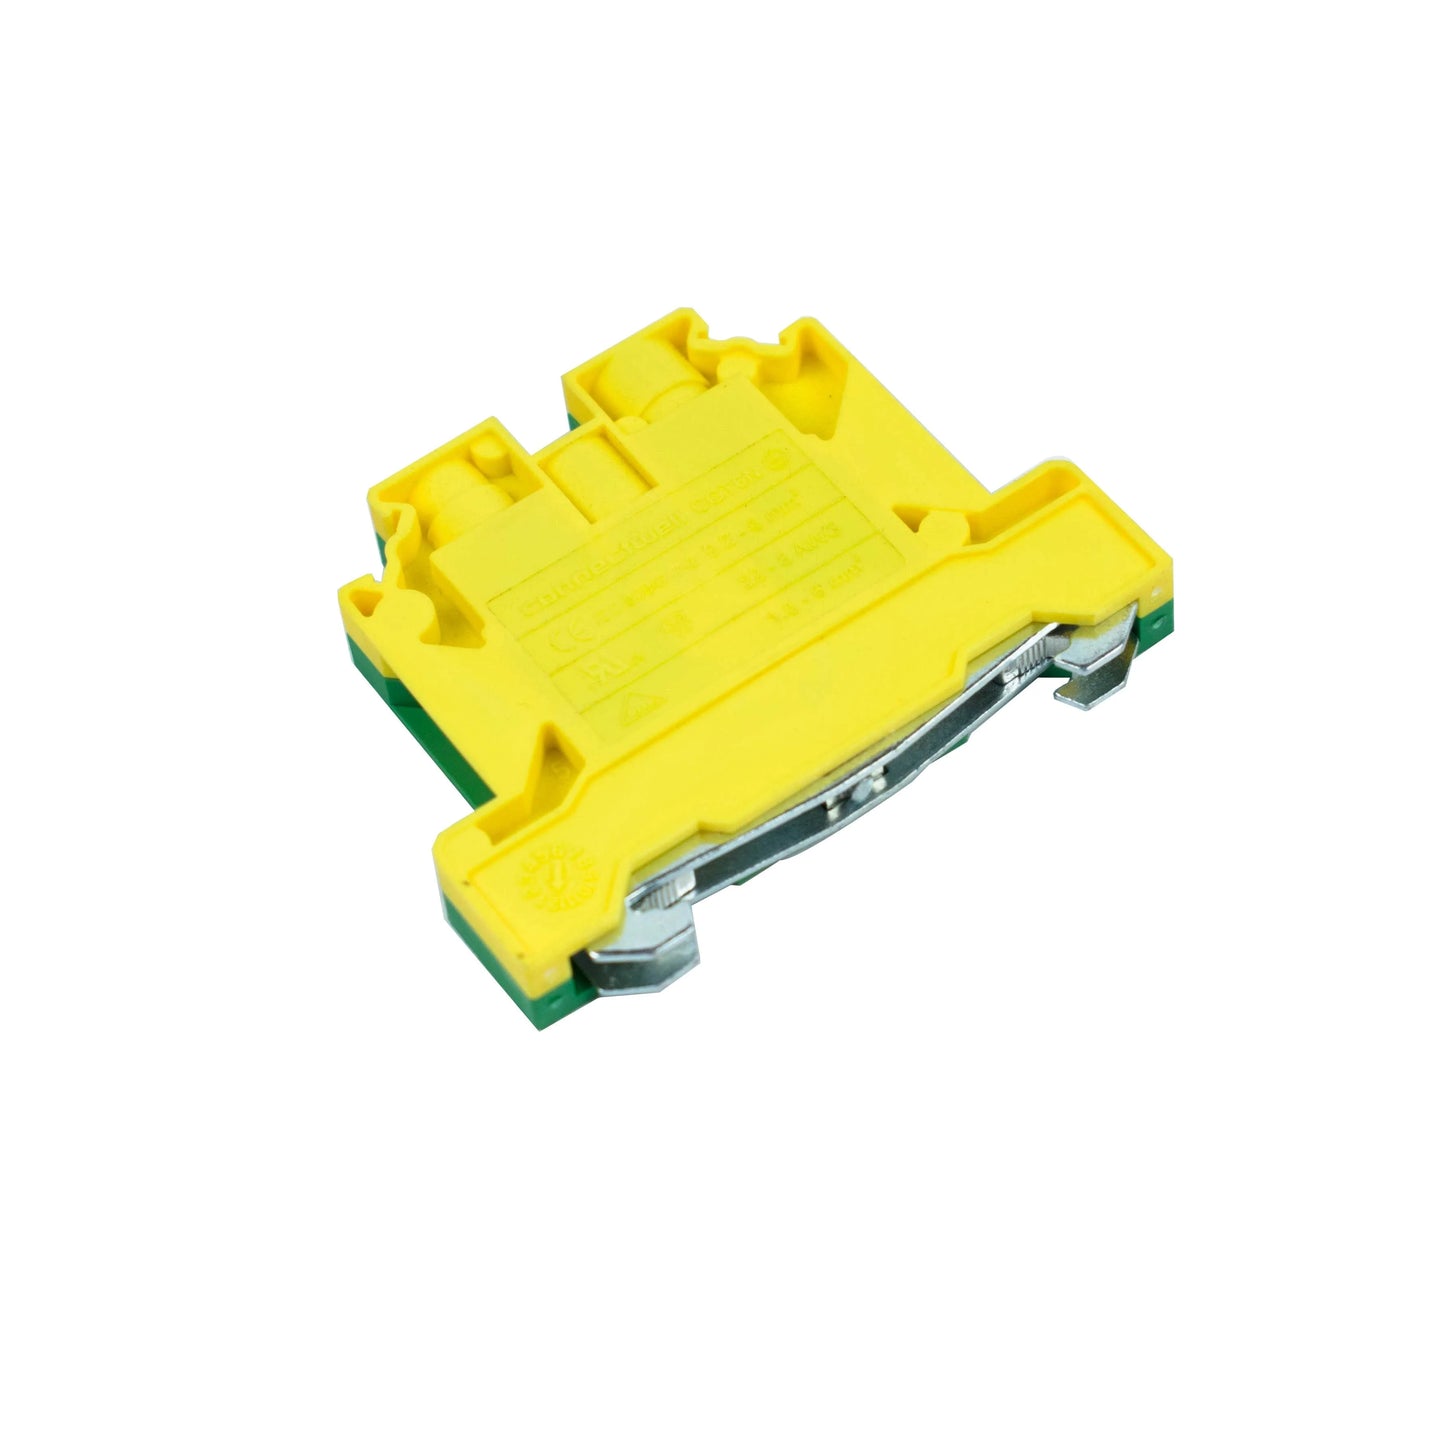 Connectwell CGT10N 10sq mm Screw Clamp Ground Terminal Block